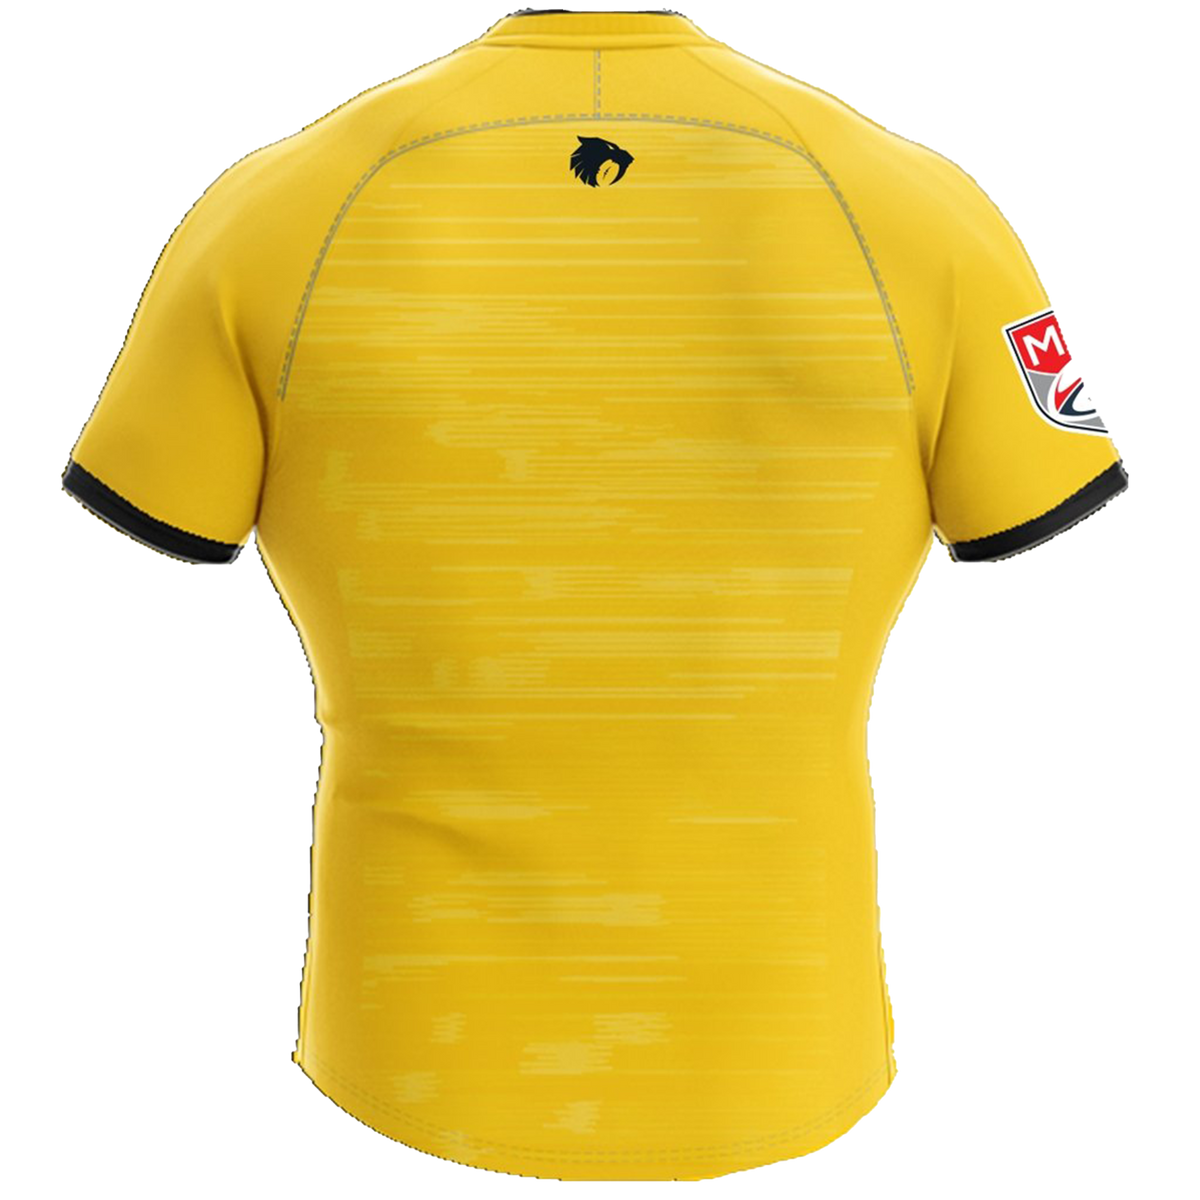 Houston Sabercats 2021 Away Paladin Replica Away Rugby Shirt - Yellow/Black - Adult Unisex available sizing XS - 4XL